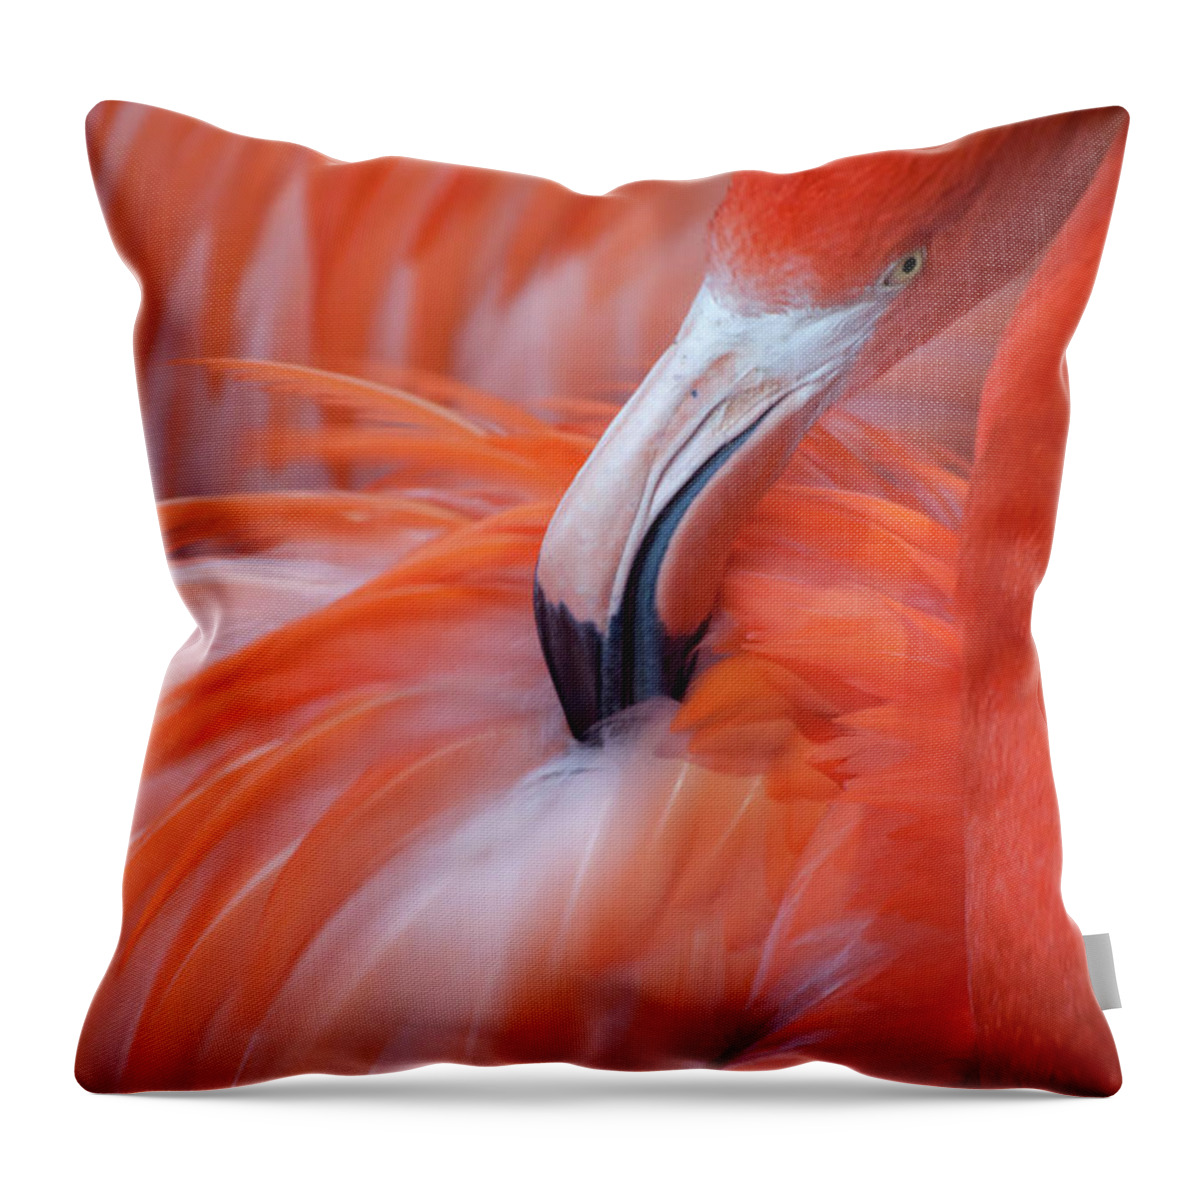 Animal Themes Throw Pillow featuring the photograph Flamingo by Phil Corley  Goldenorfephotography